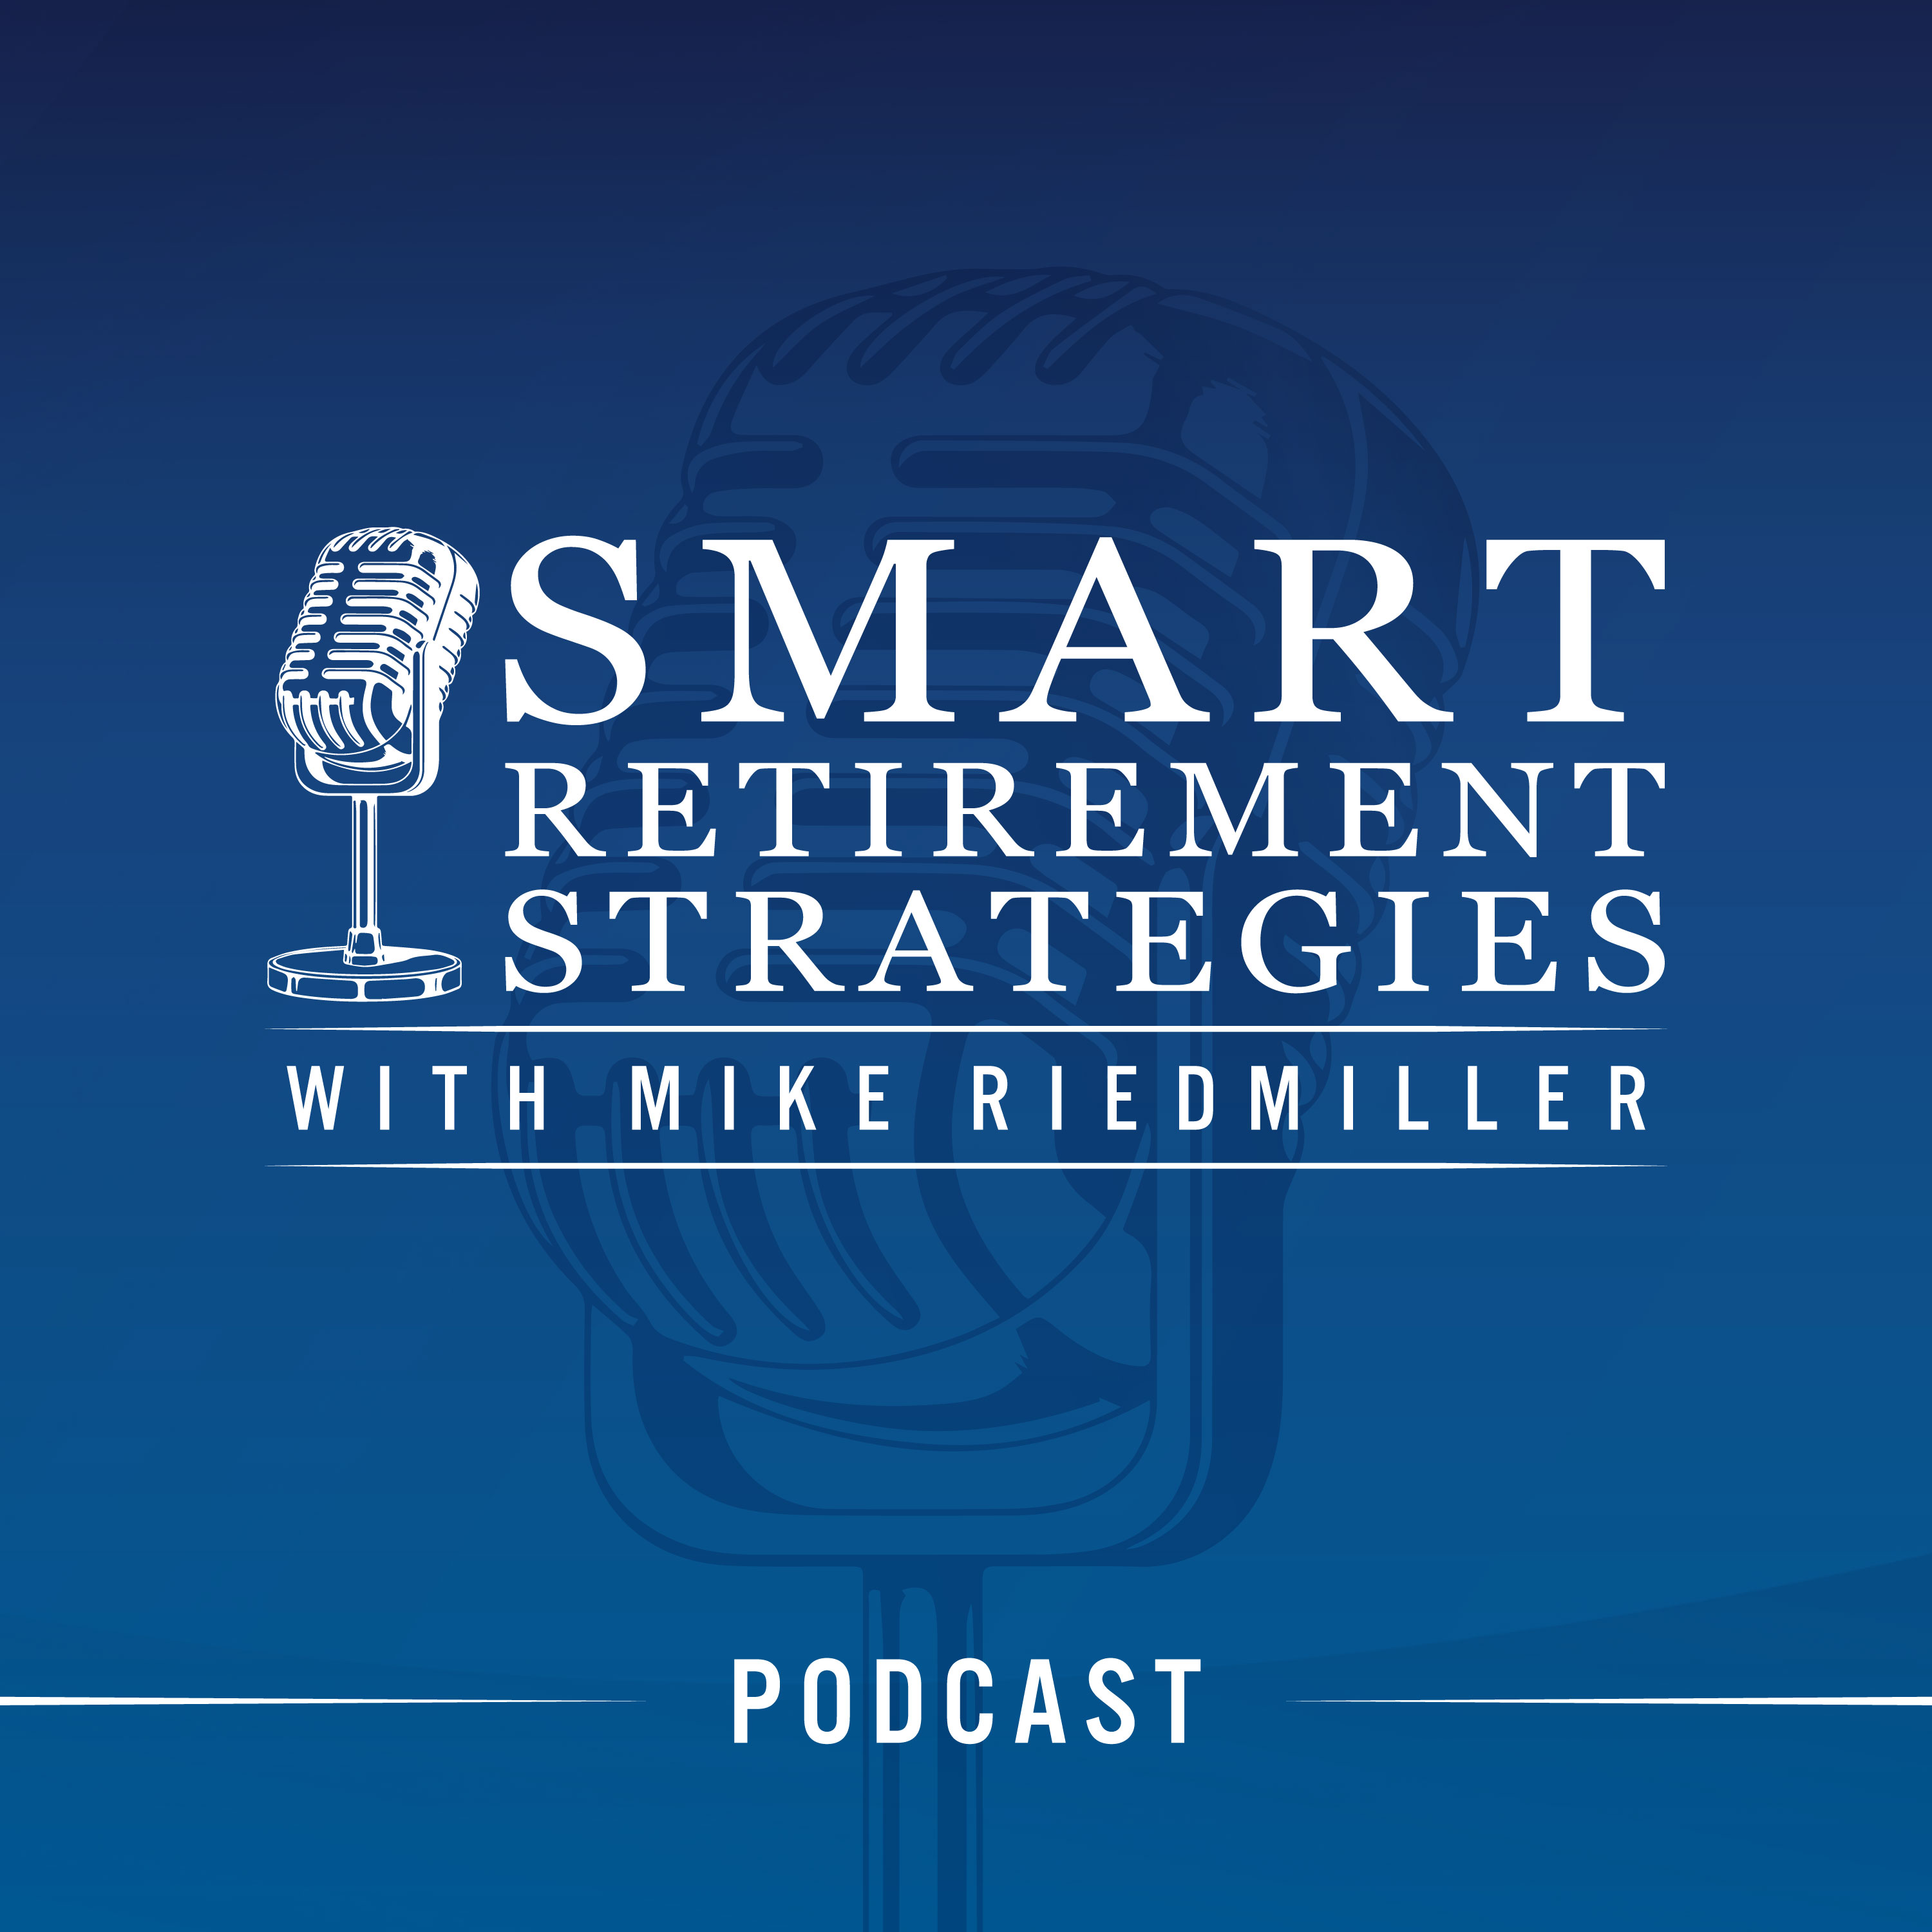 Smart Retirement Strategies with Mike Riedmiller